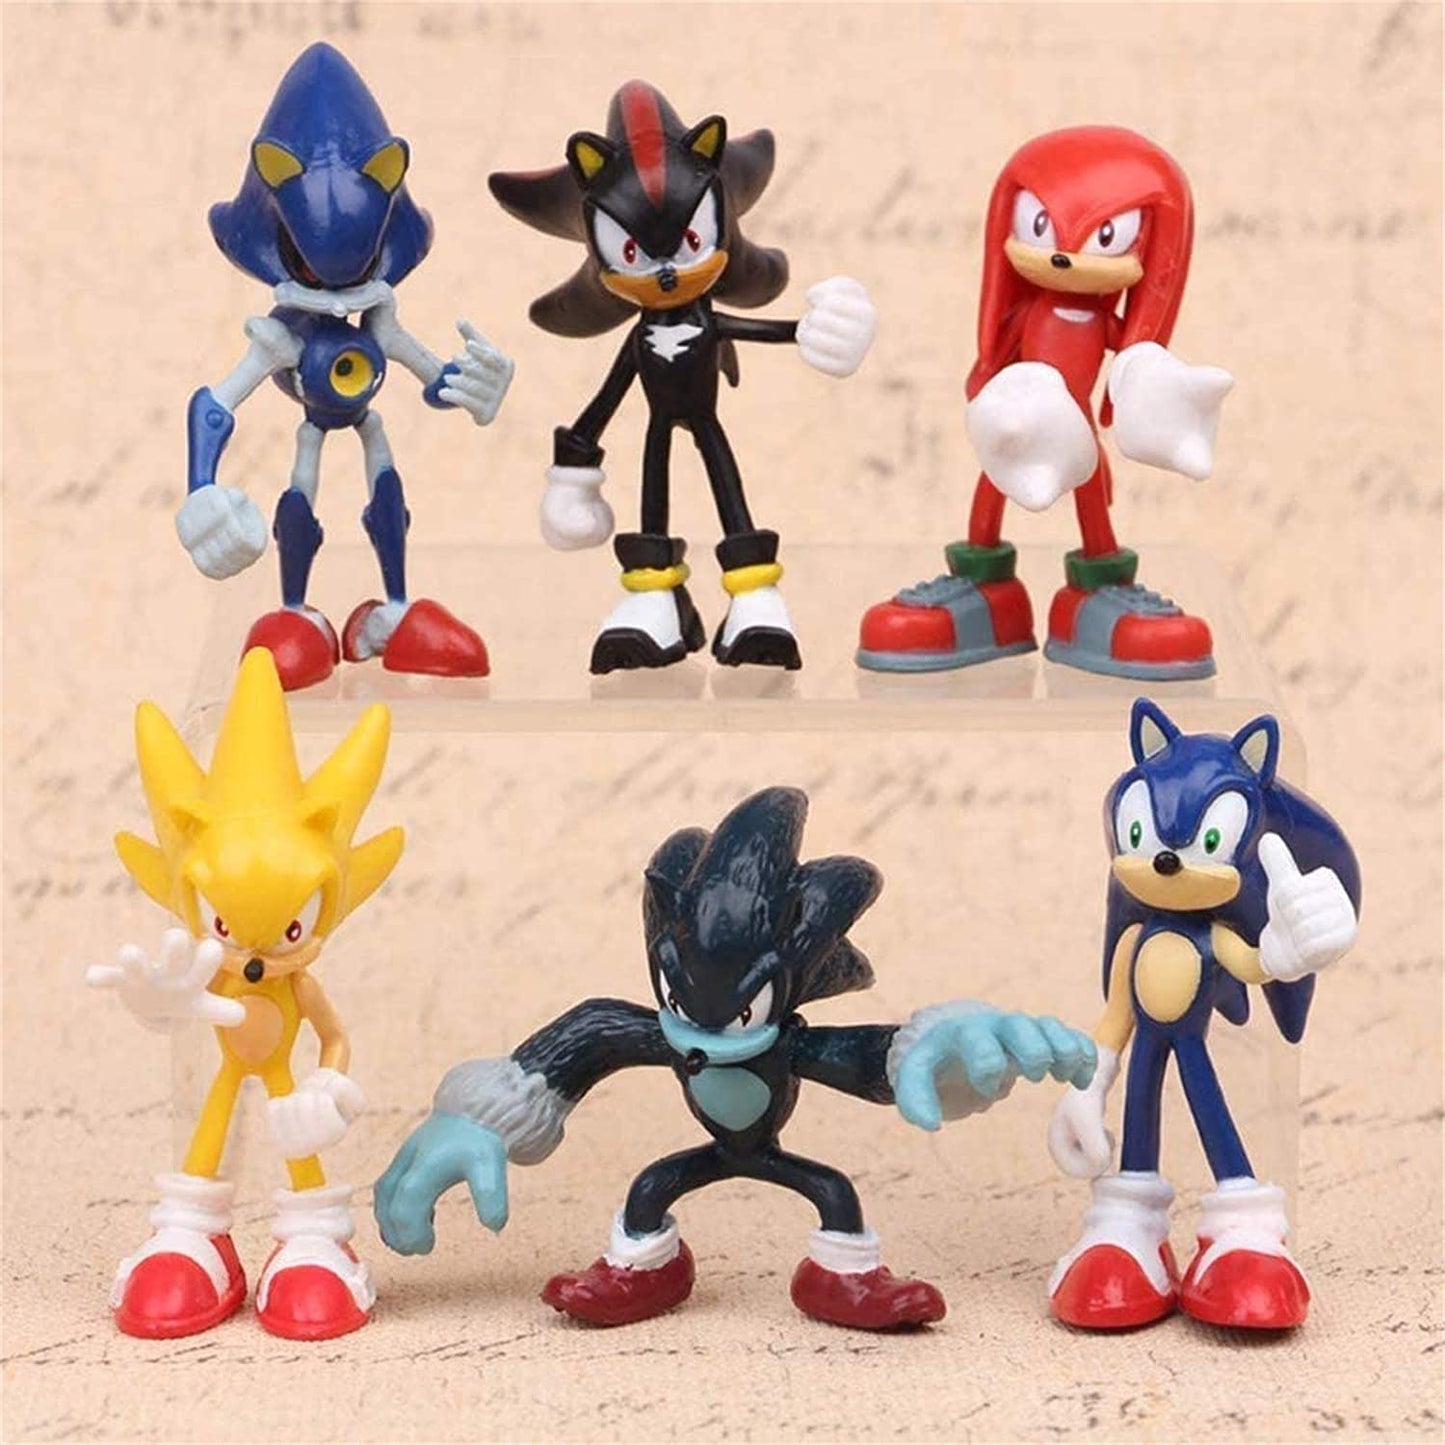 6PS D2 Sonic The Hedgehog,Sonic Toys,Action Figures,Party Supplies Decorations,Sonic Character Toy Series or Gifts for Children of Sonic The Hedgehog Fans